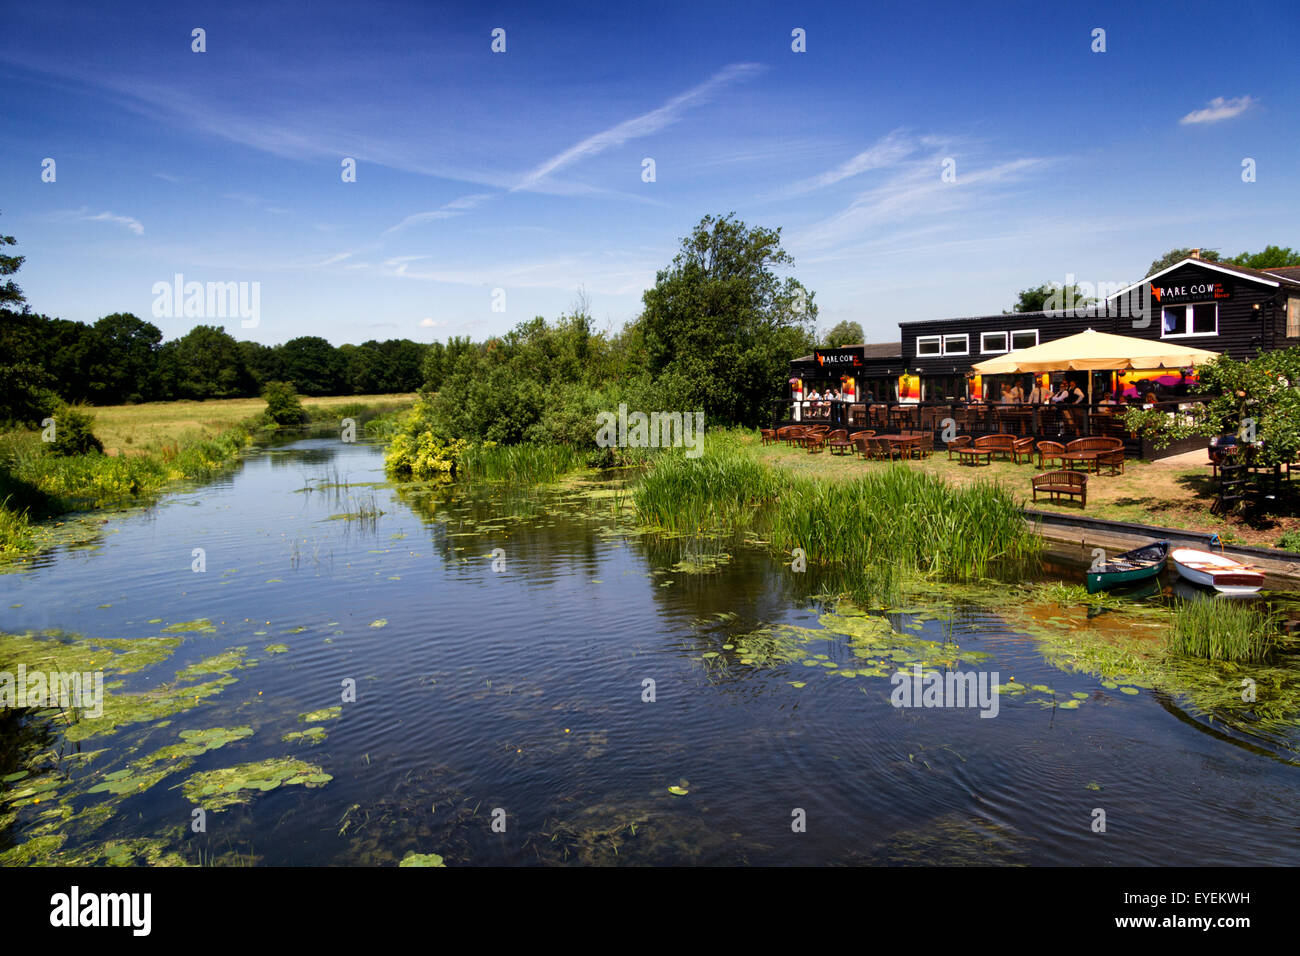 The Rare Cow Restaurant, by the River Stour, Sudbury, Suffolk, UK Stock Photo